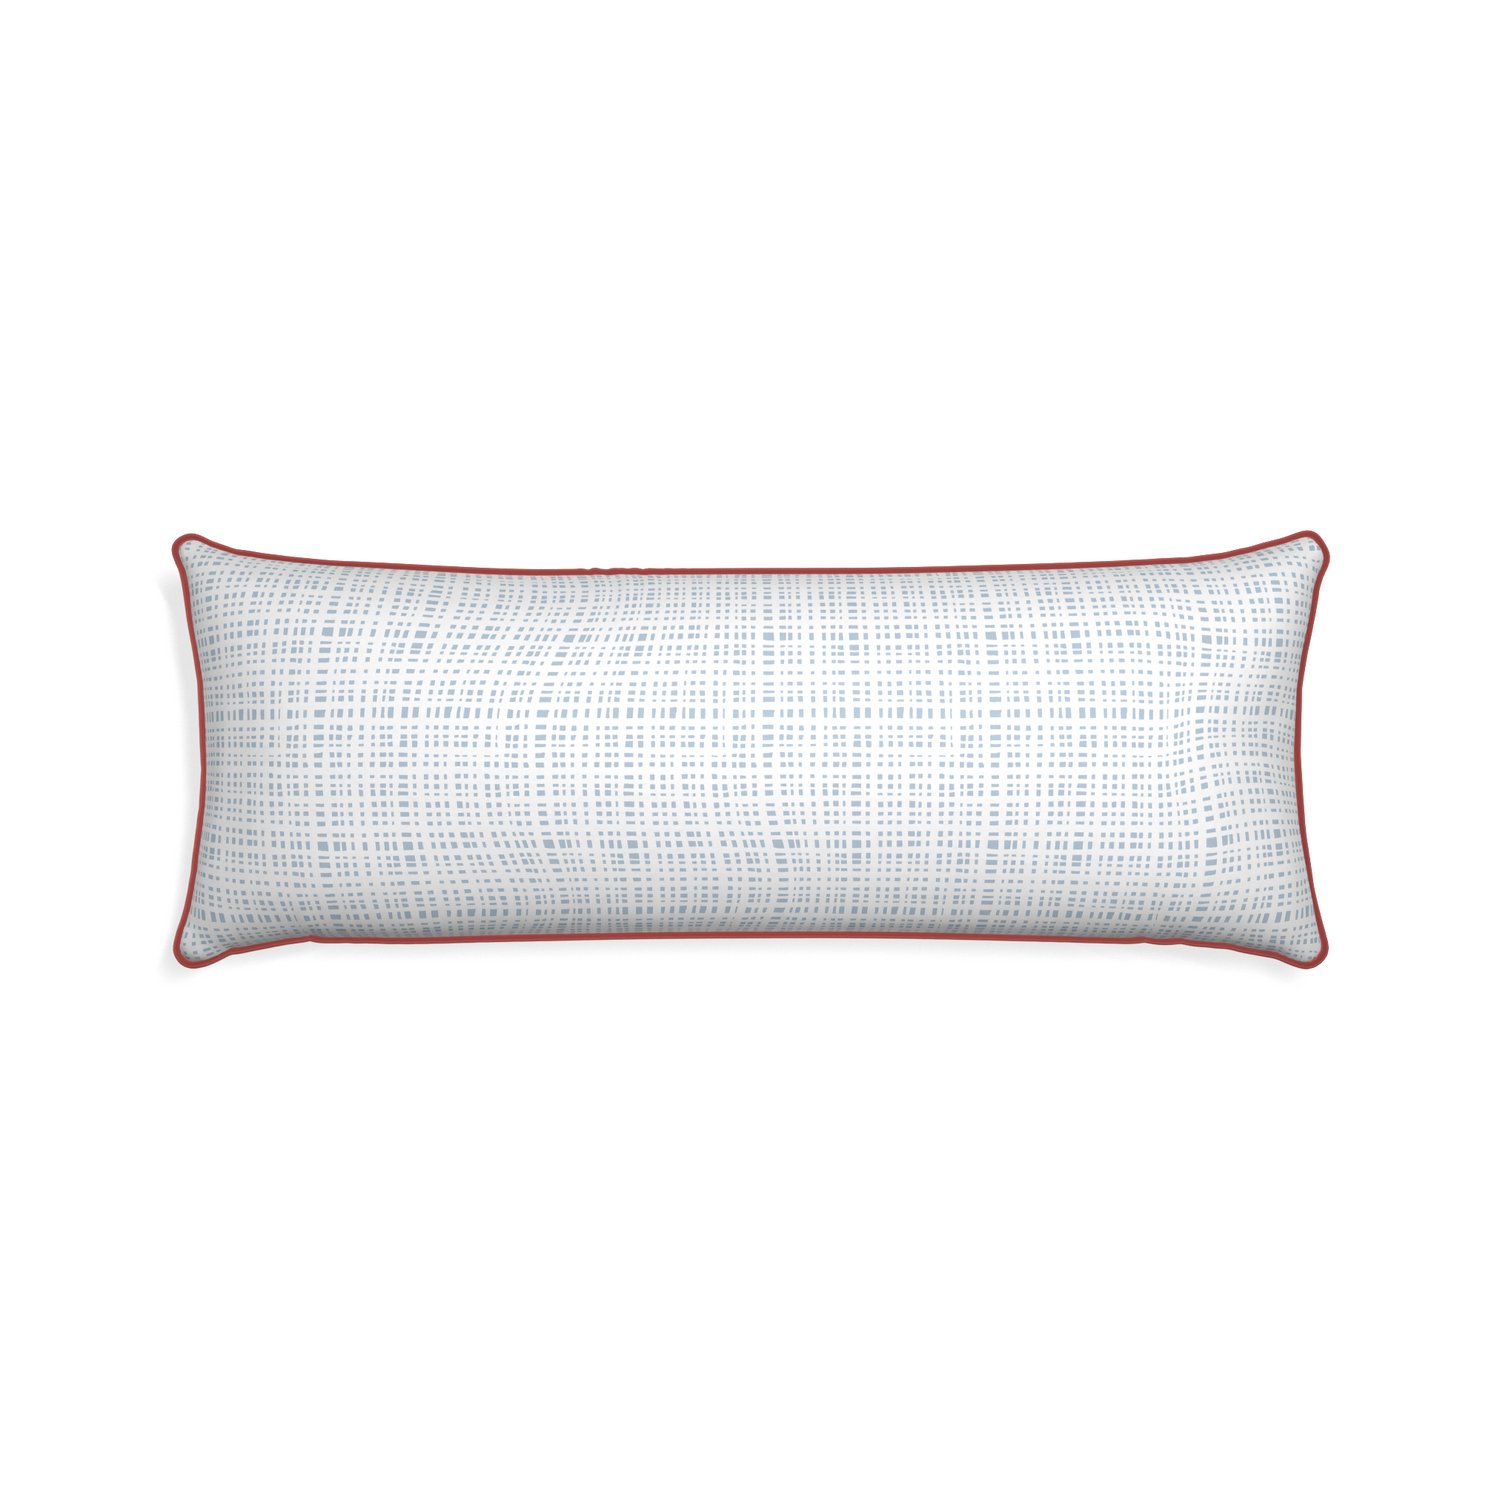 Xl-lumbar ginger sky custom pillow with c piping on white background